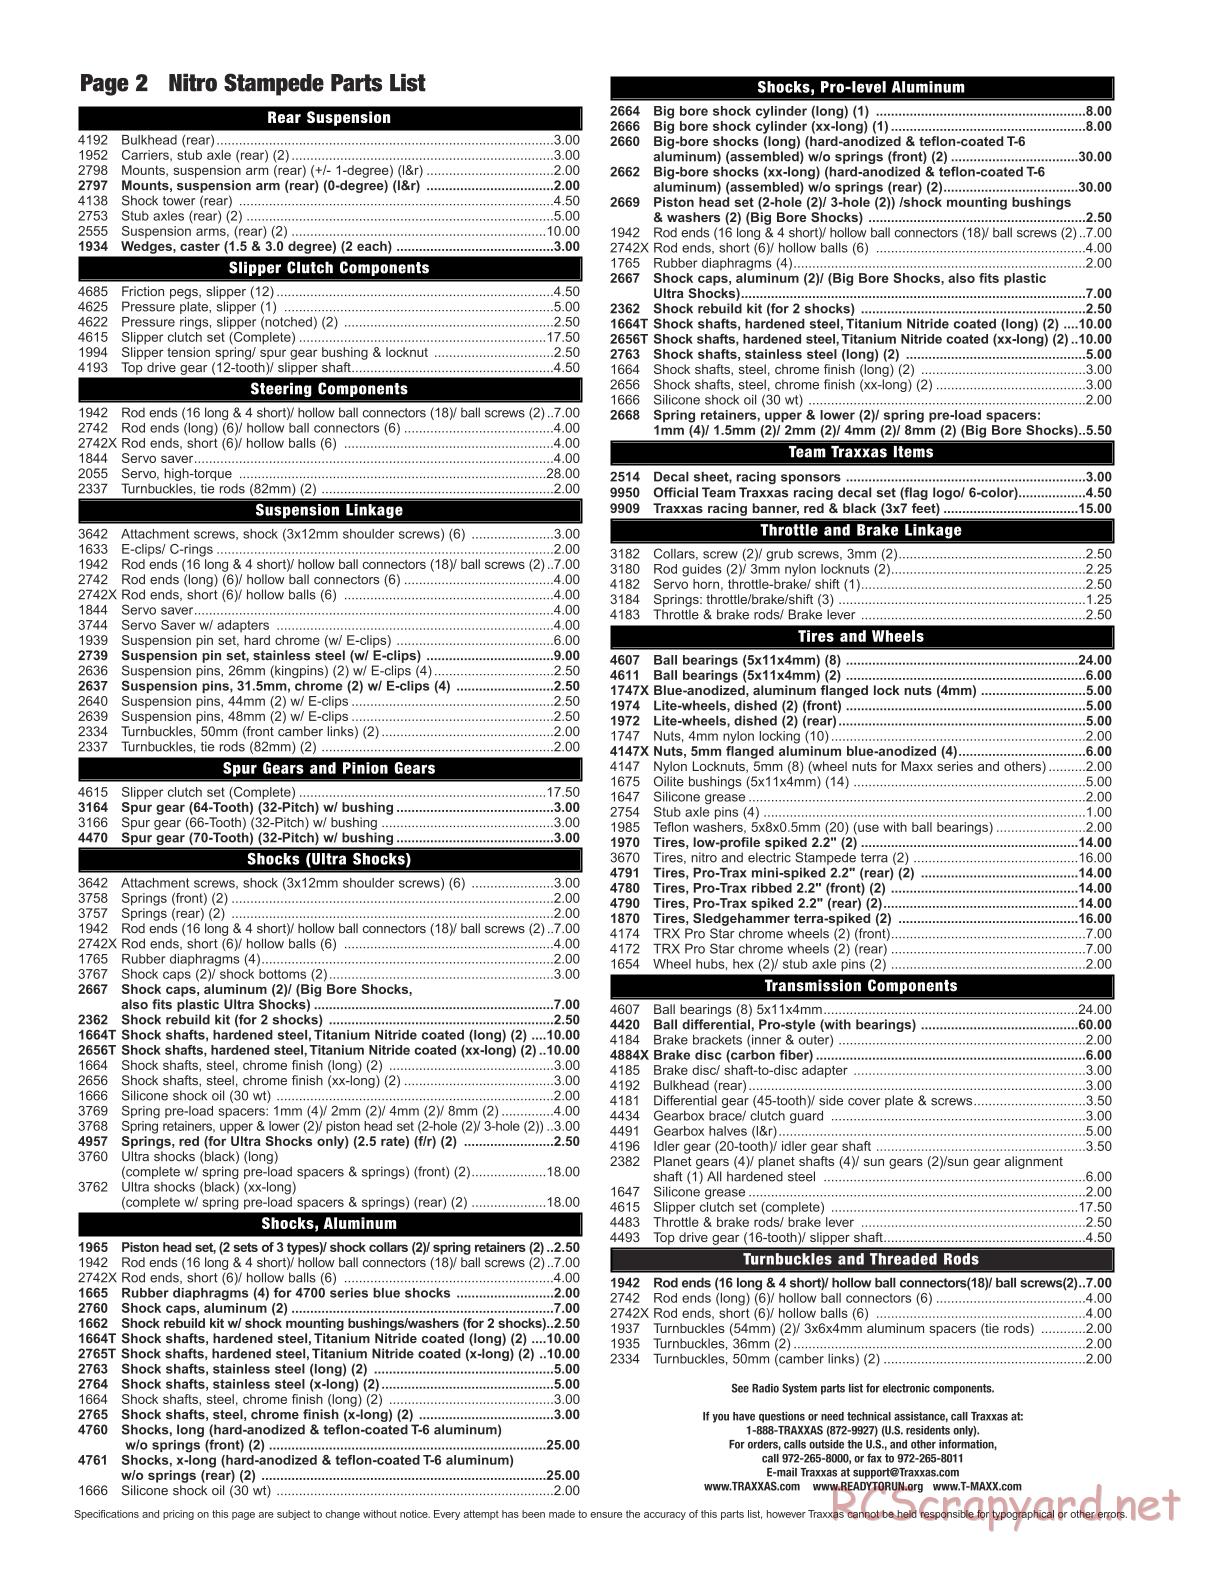 Traxxas - Nitro Stampede - Parts List - Page 2